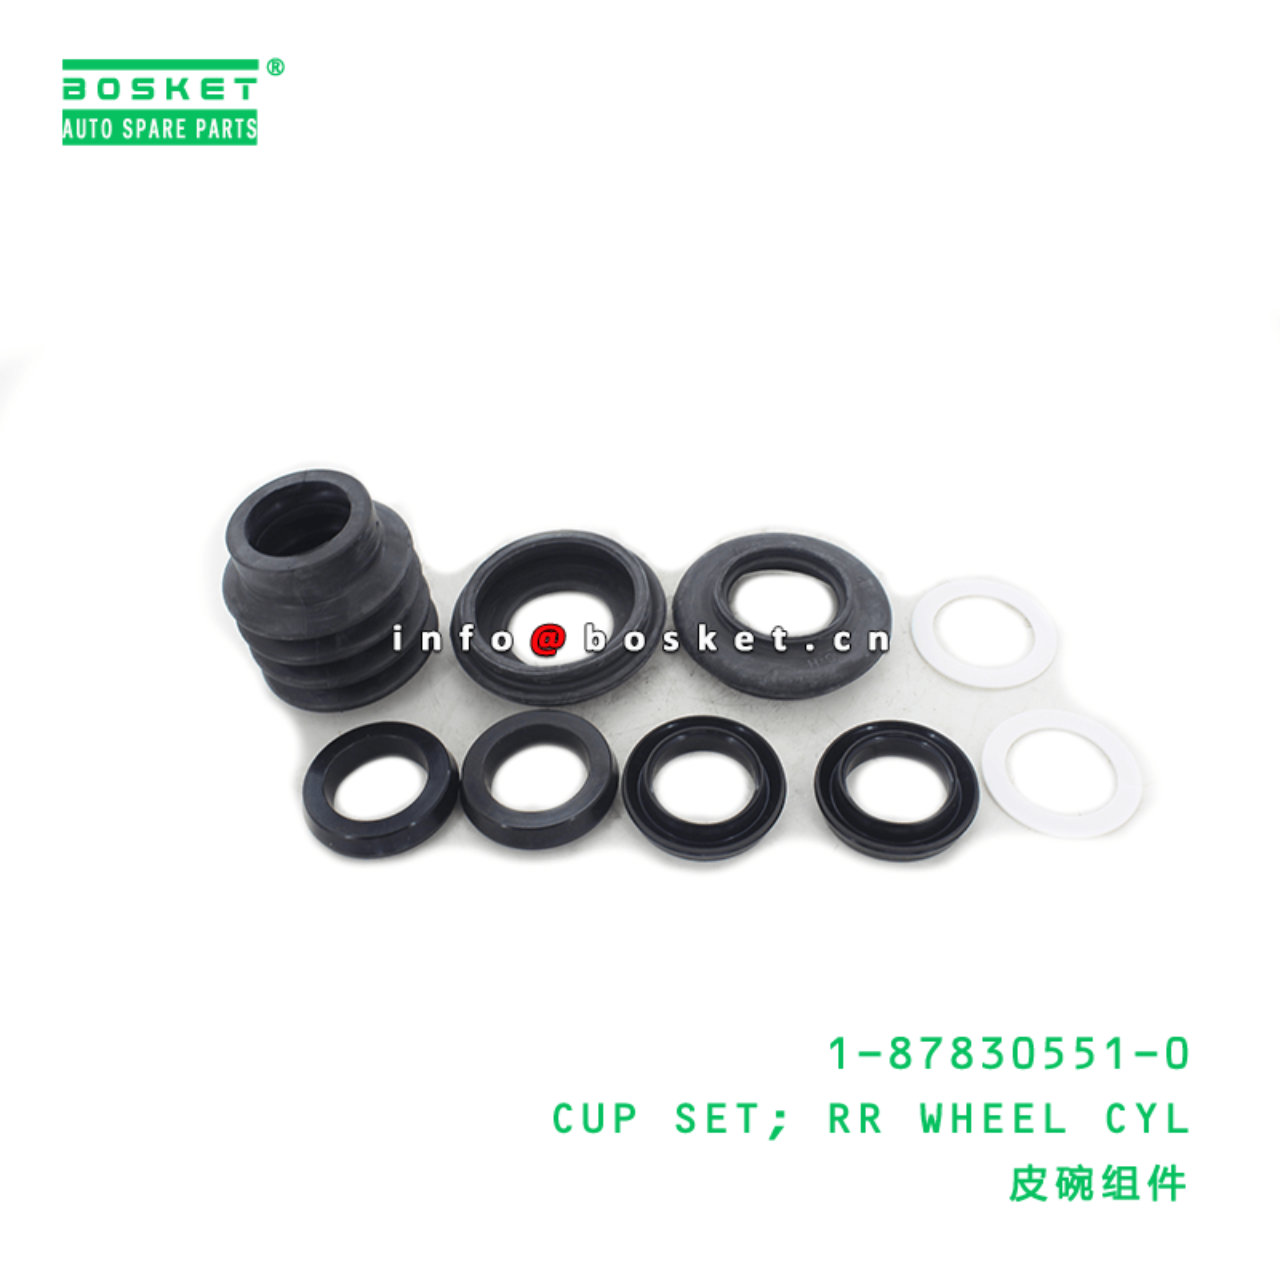  1-87830551-0 Rear Wheel Cylinder Cup Set 1878305510 Suitable for ISUZU FTS